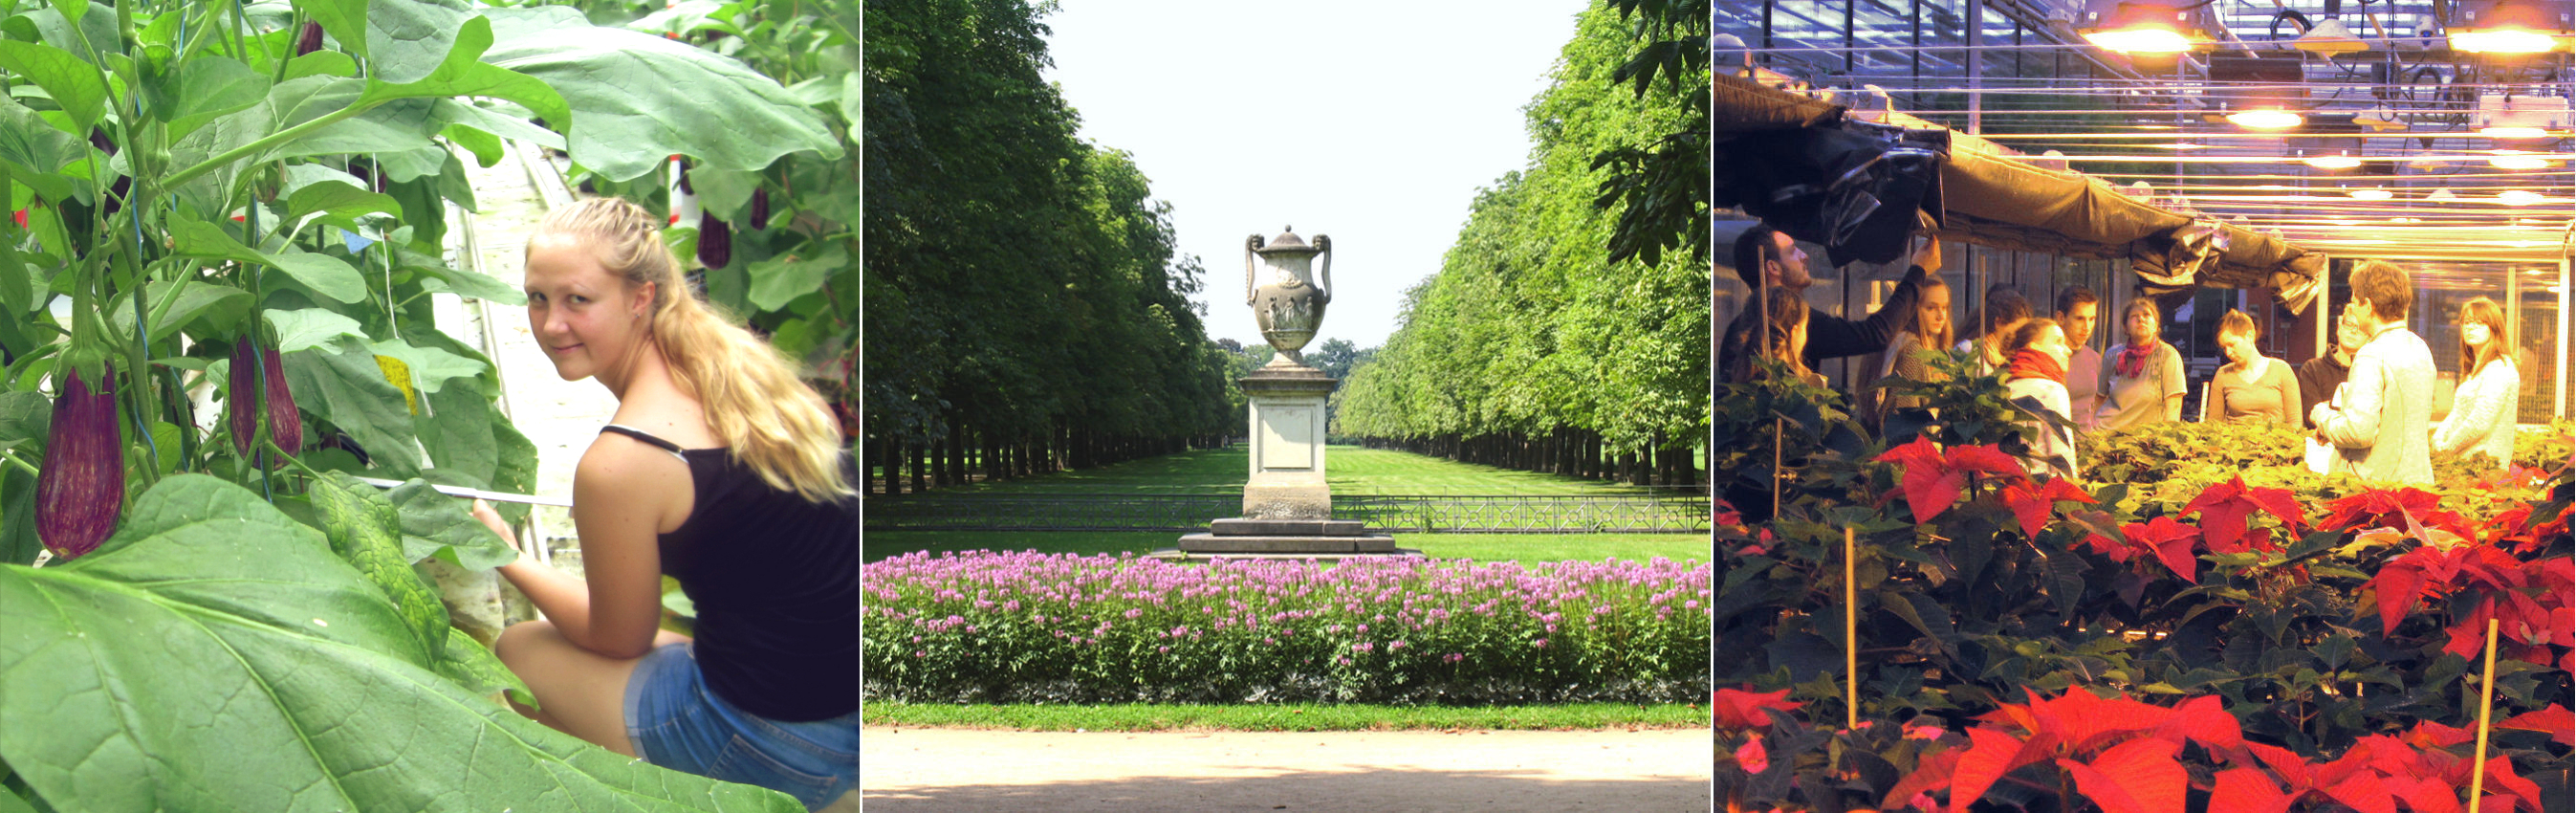 The picture consists of 3 photos side by side, left picture: a young man picking tomatoes in a greenhouse, middle picture: detail of the park of the castle Pillnitz, in the foreground a flowerbed with purple flowering perennials, behind it a meadow, on top of it a stone pedestal with a stone amphora in the middle, the meadow is bordered by a row of trees on the left and right side, right picture: a group of about 10 students is standing in a greenhouse, in the foreground are 2 rows of poinsettias planted in pots.